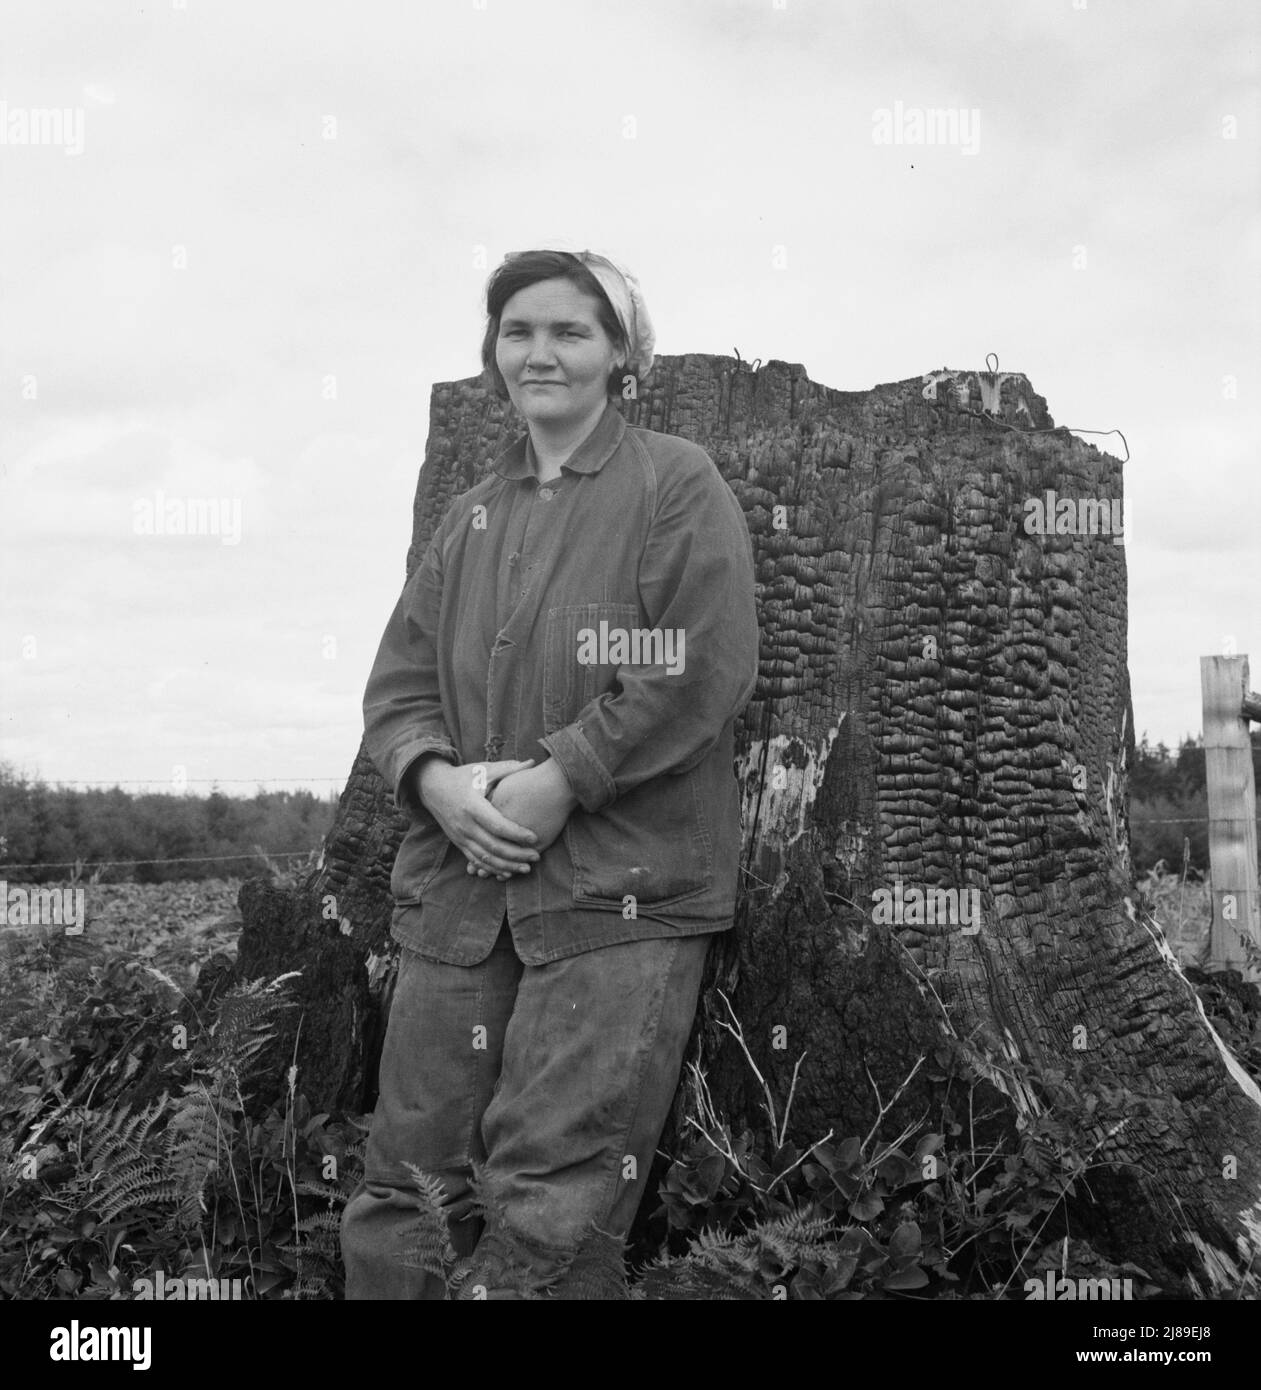 Mrs Arnold, age thirty two, does man's work on the rough and stumpy land to build a farm. Western Washington, Thurston County, Michigan Hill. See general caption number 36. Stock Photo